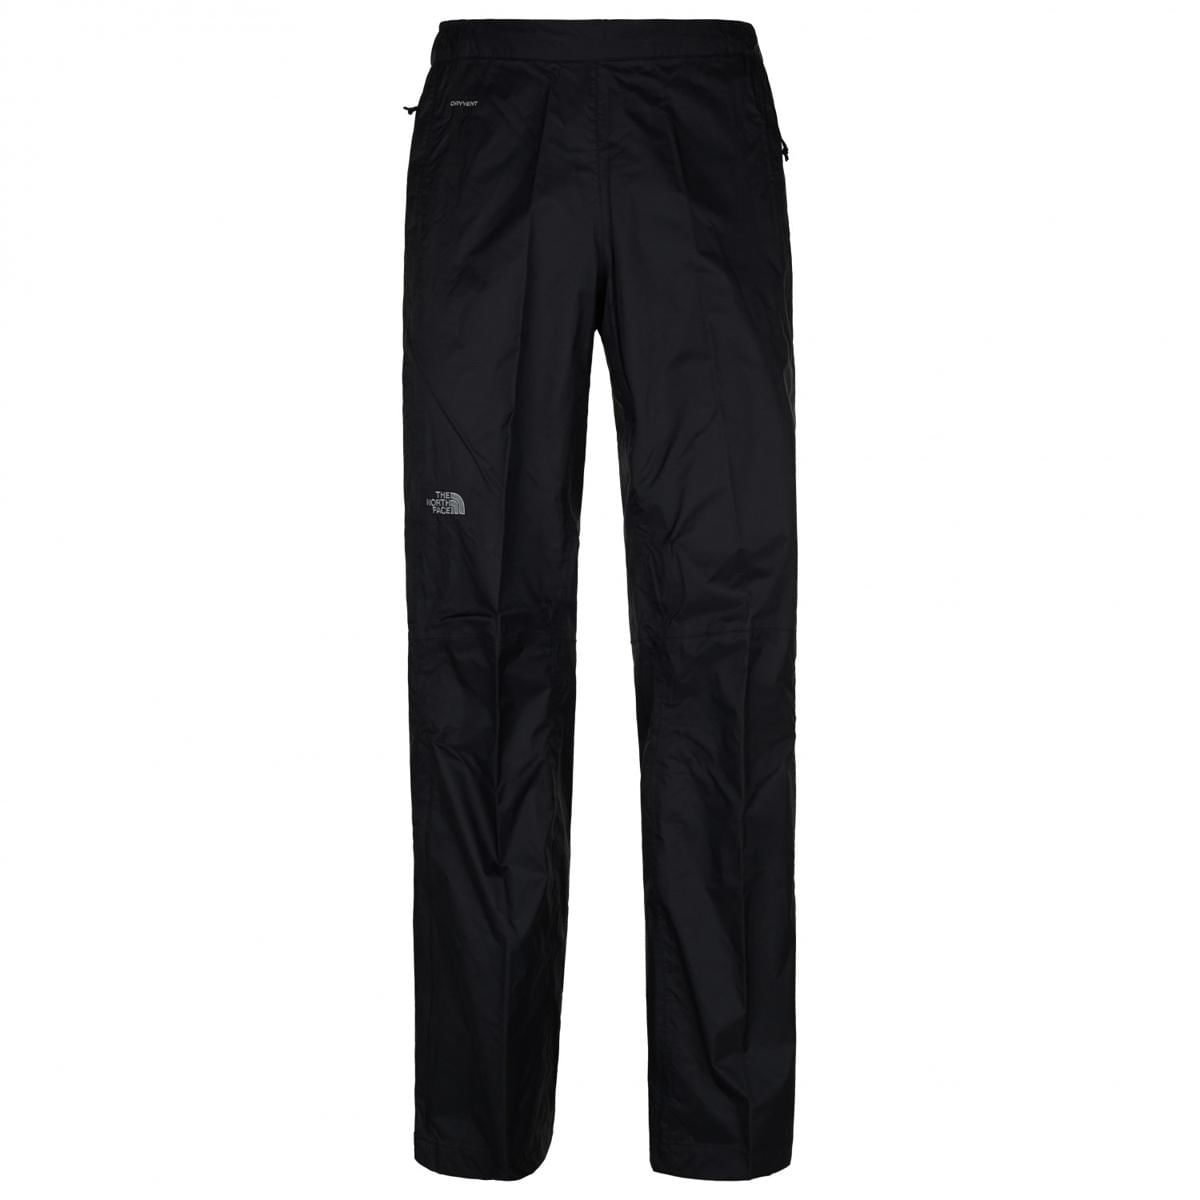 THE NORTH FACE Venture Pant Dryvent